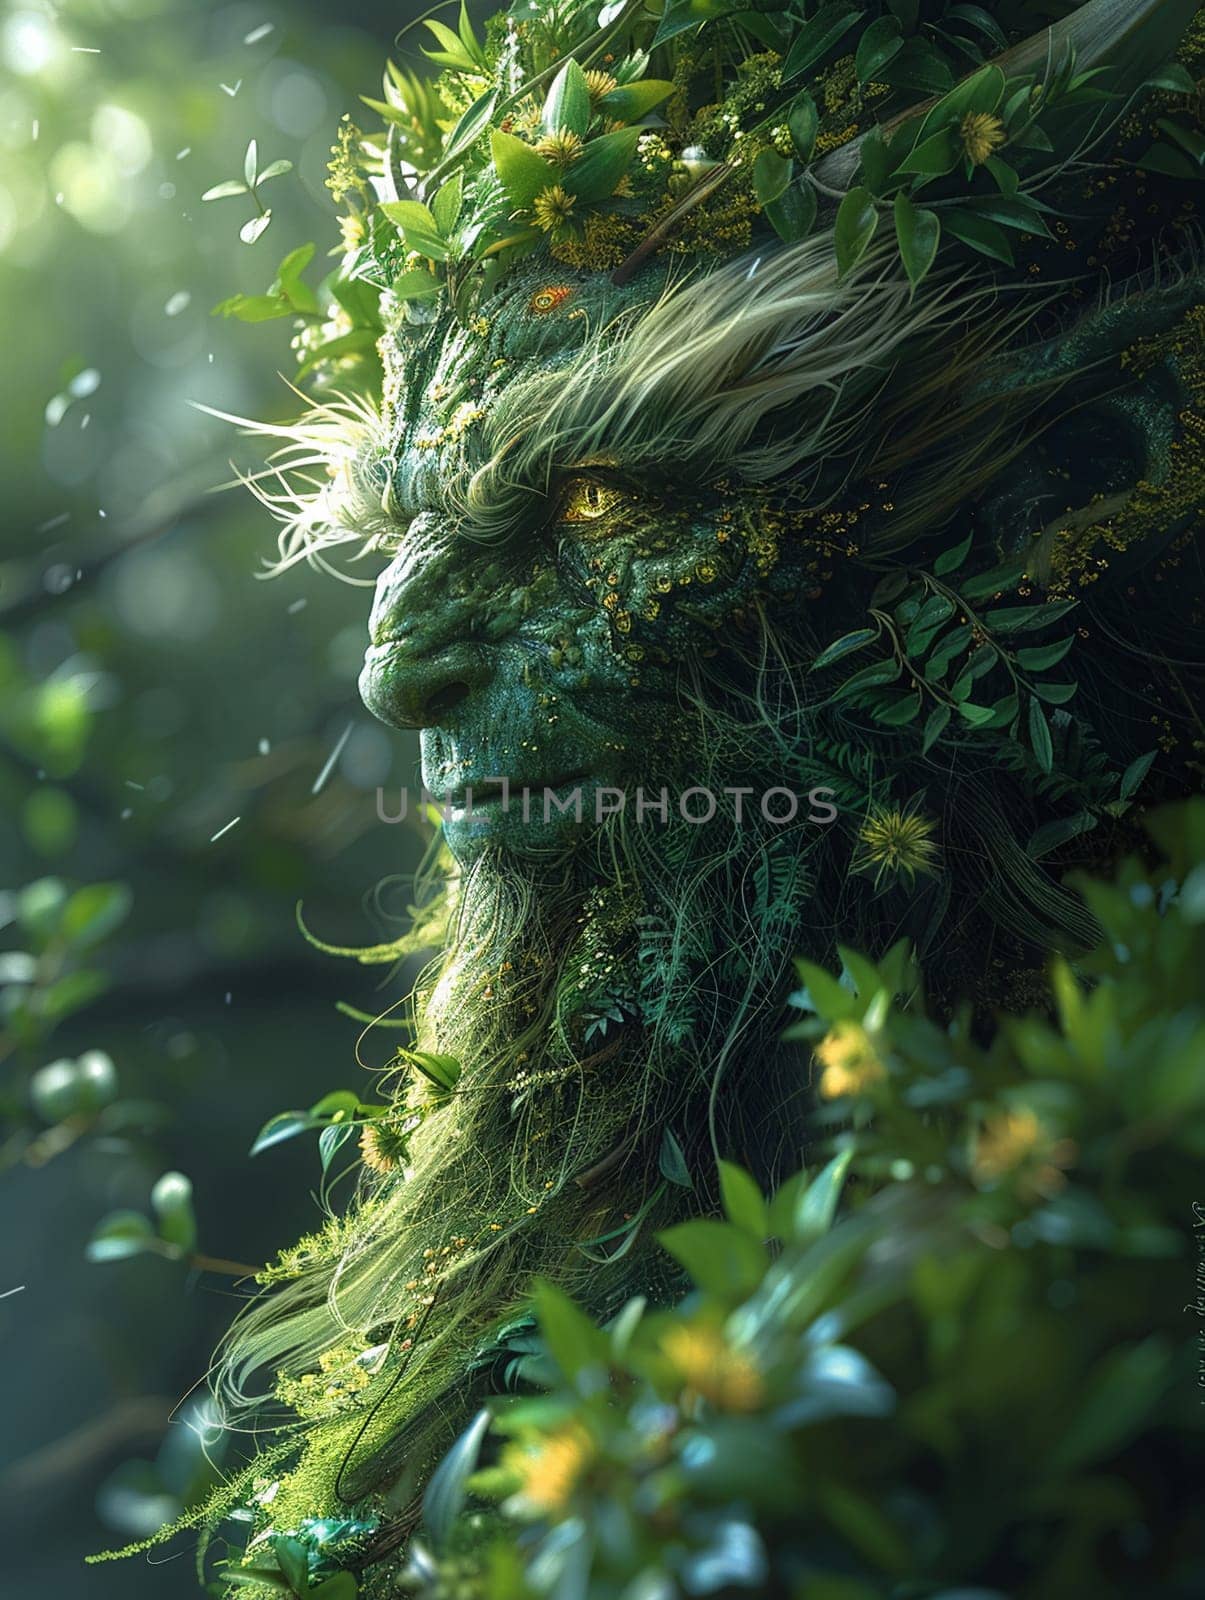 Guardian of the forgotten forest, their presence a whisper of nature's enduring vow.